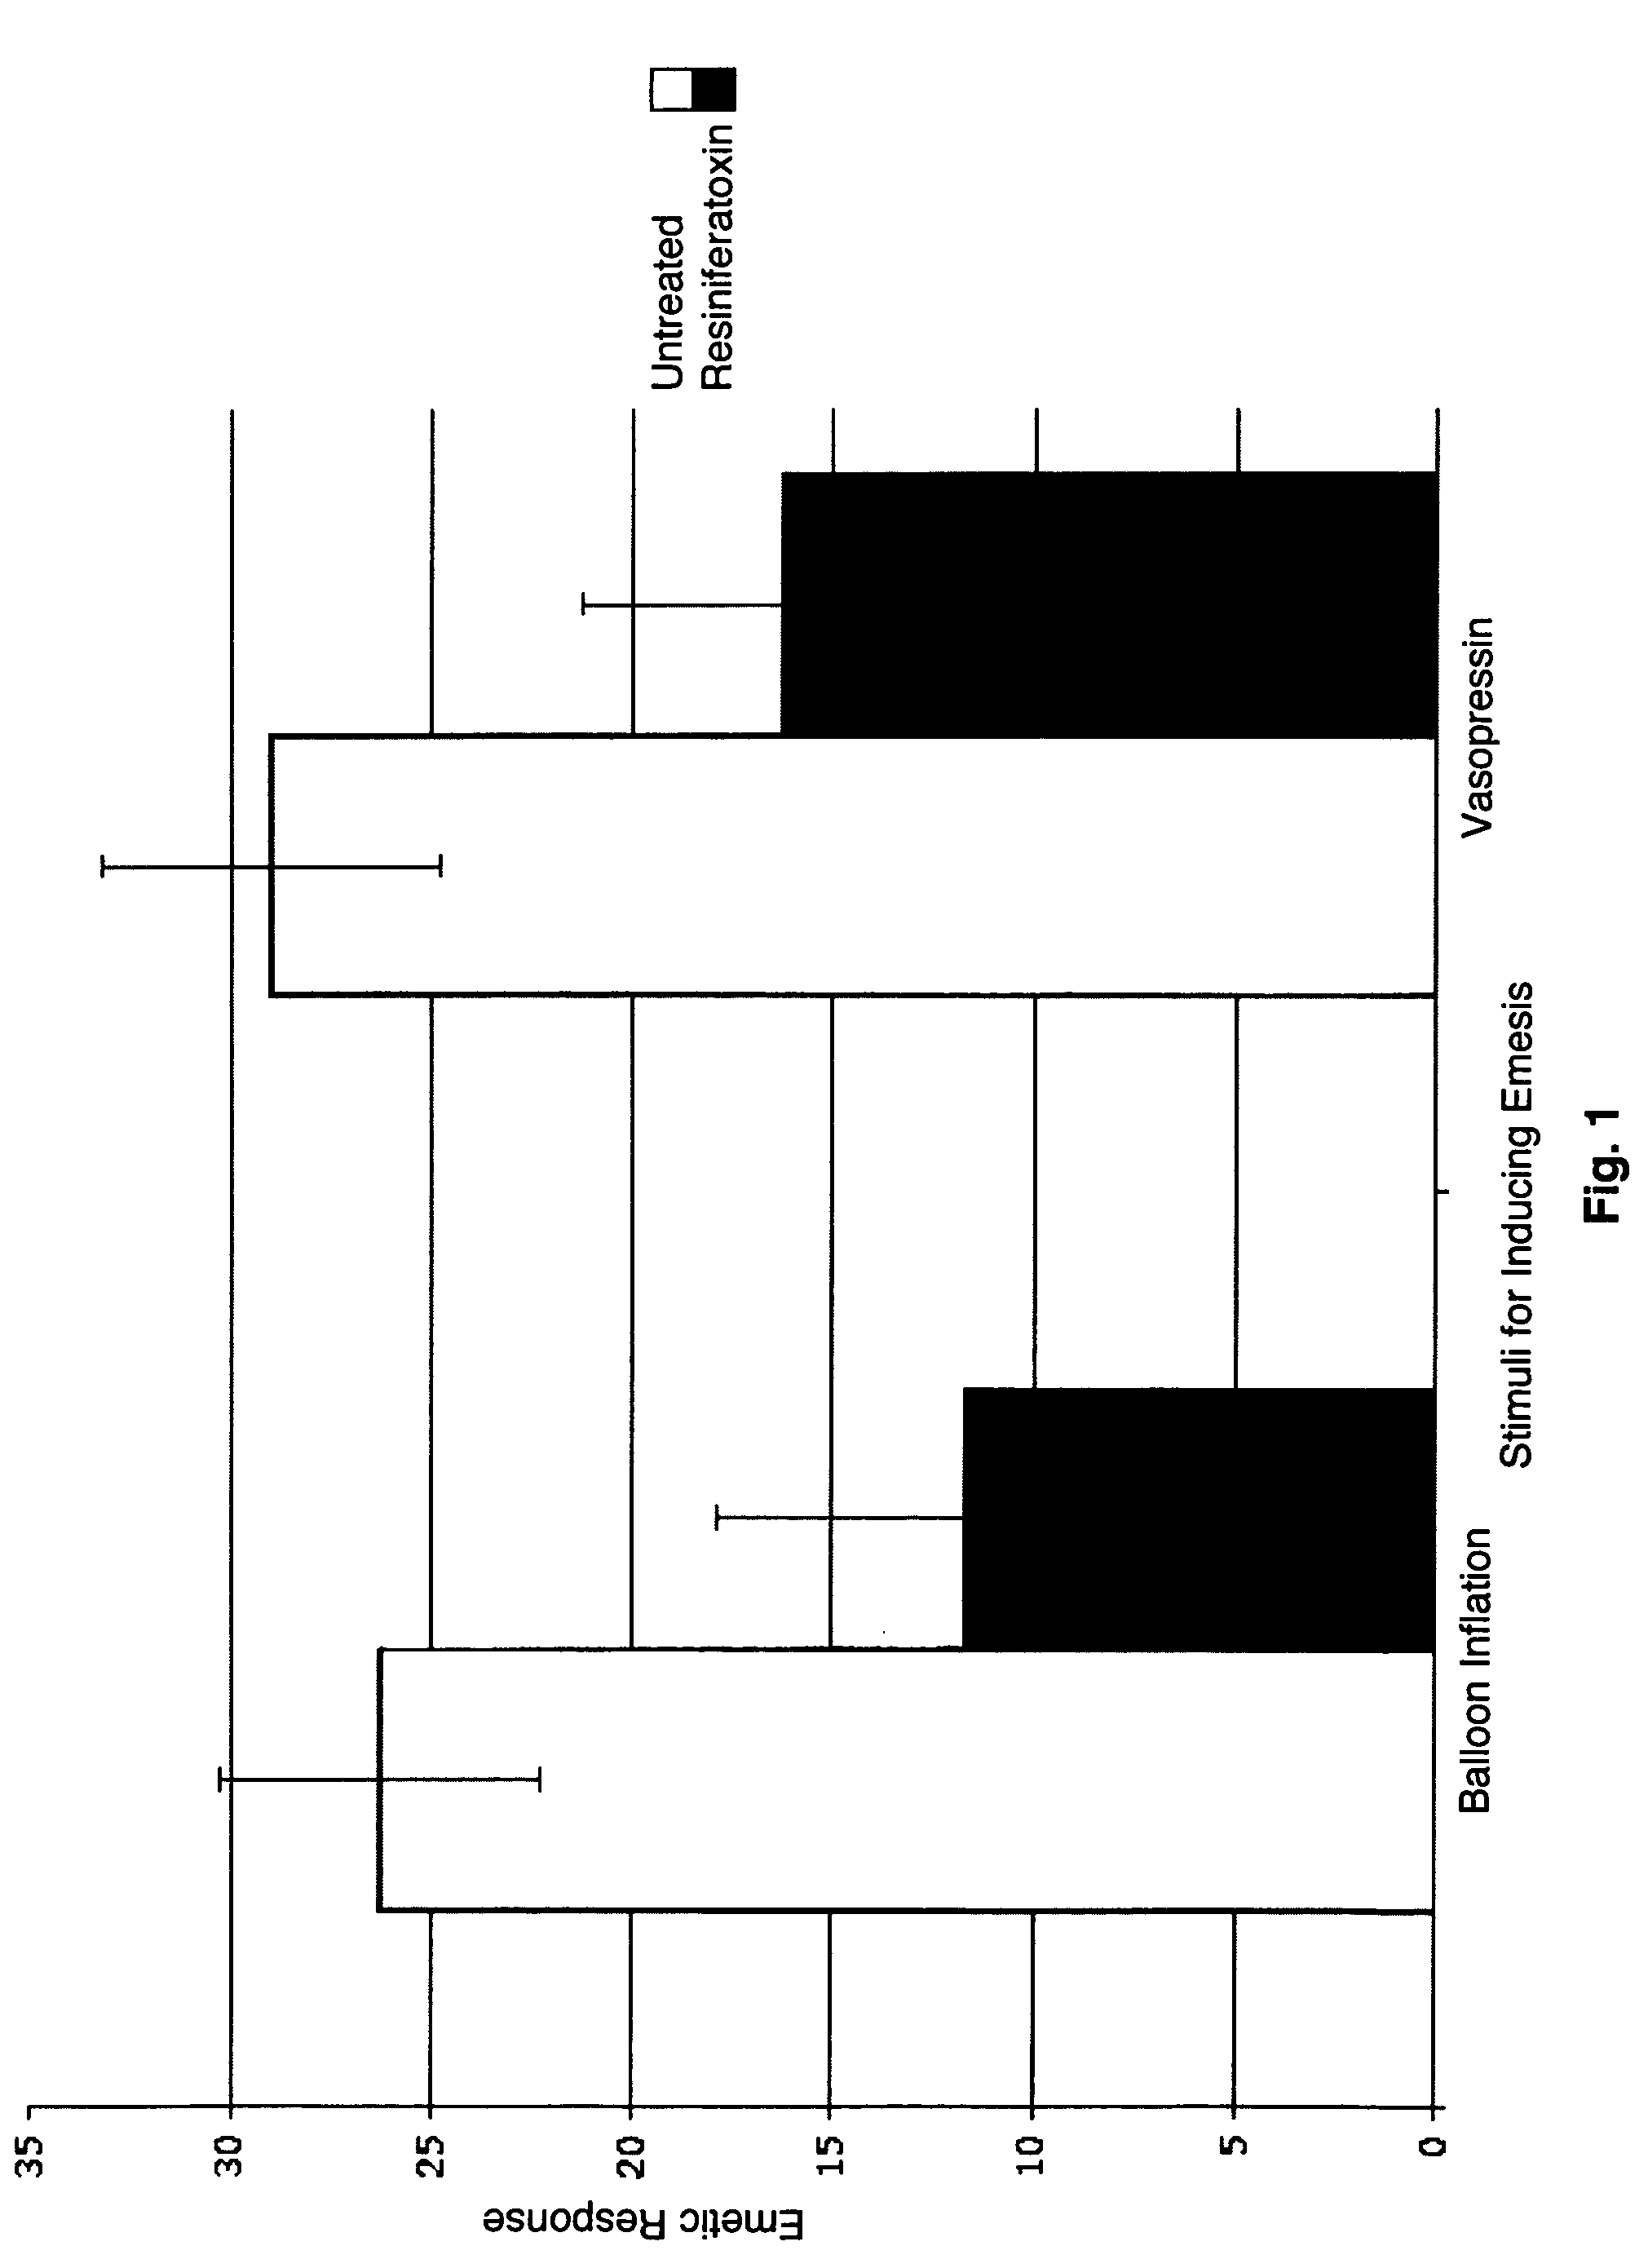 Antagonists of the transient receptor potential vanilloid 1 and uses thereof